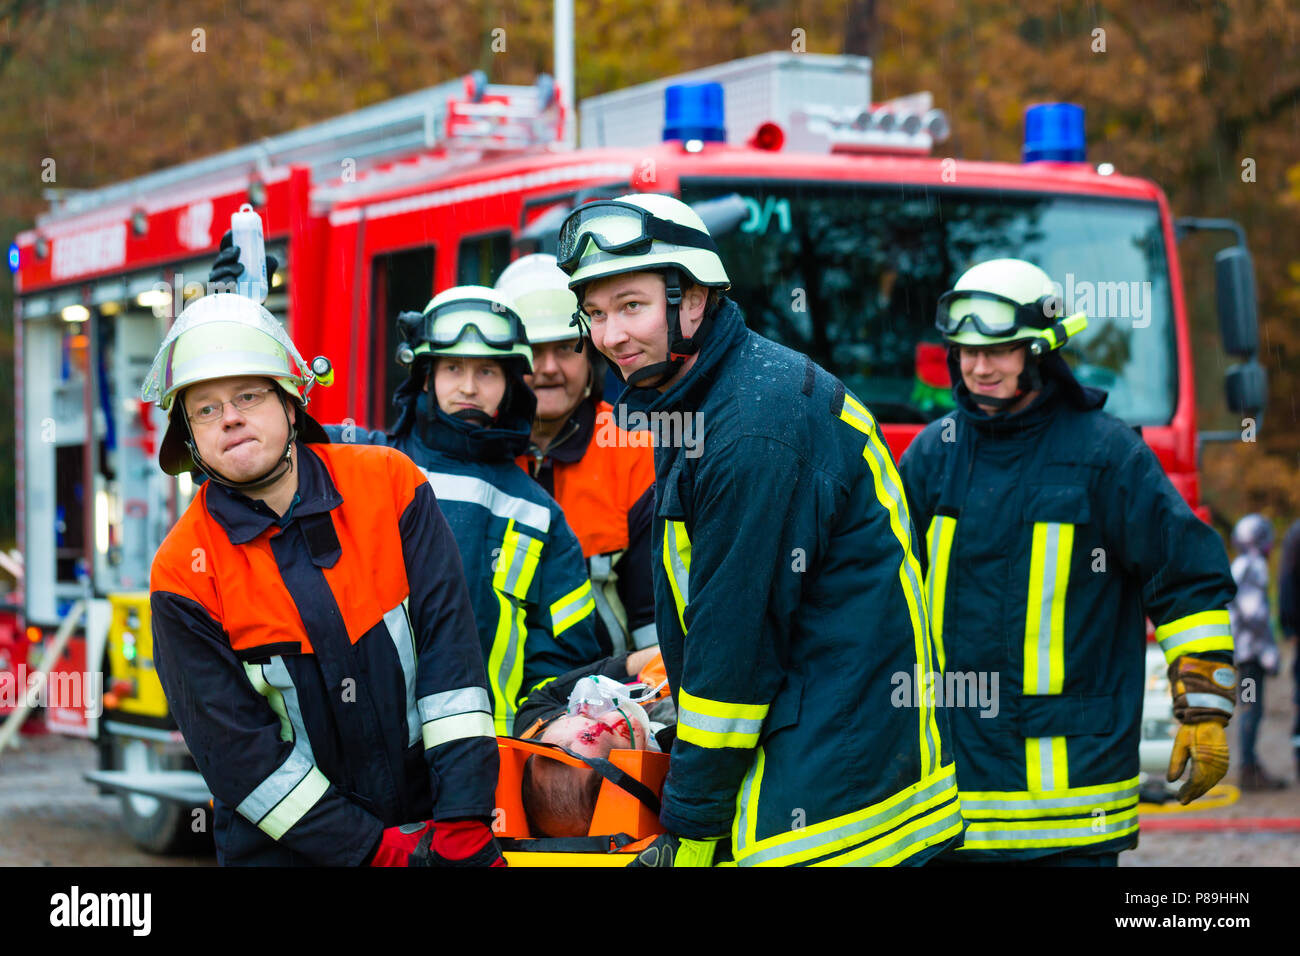 Accident - Fire brigade, Accident Victim on Stretcher Stock Photo